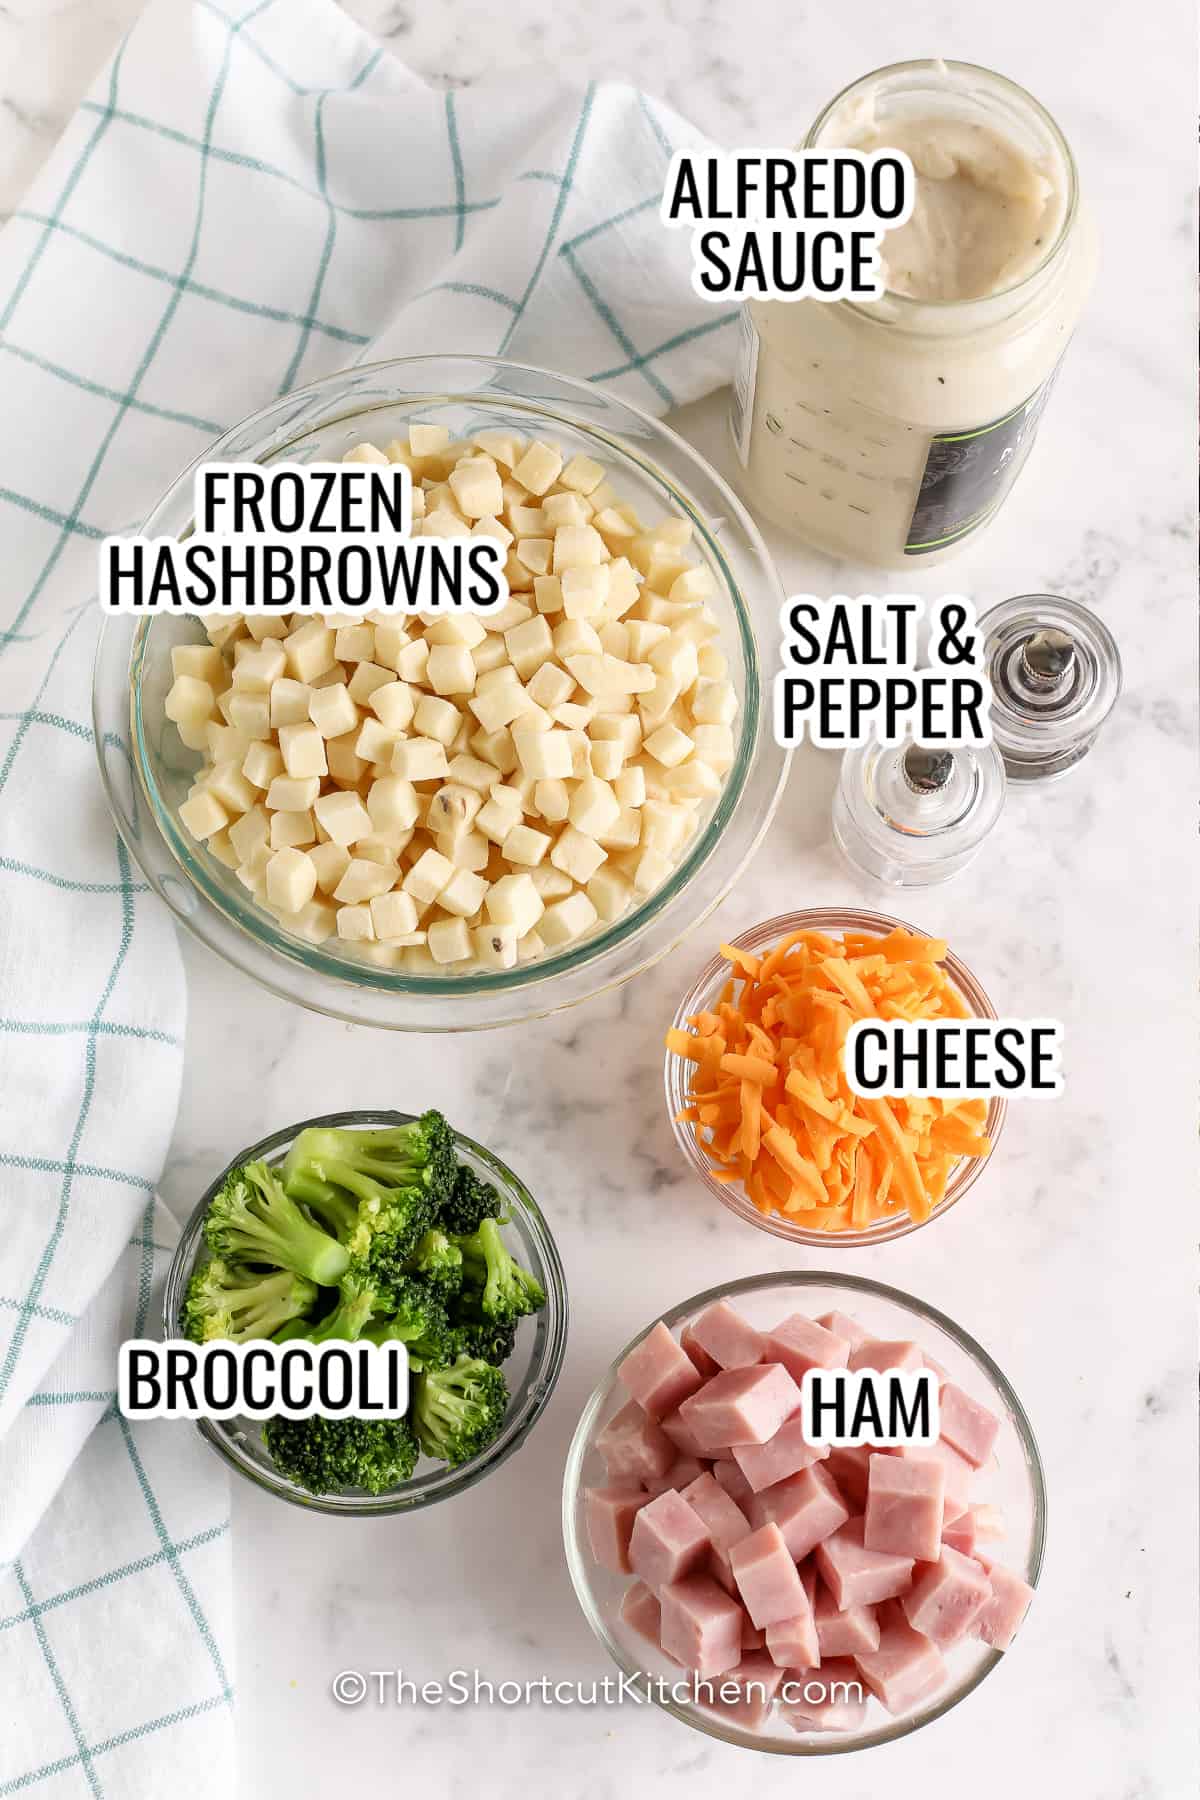 ingredients assembled to make ham and potato casserole, including frozen hashbrowns, cheese, broccoli, ham, and alfredo sauce